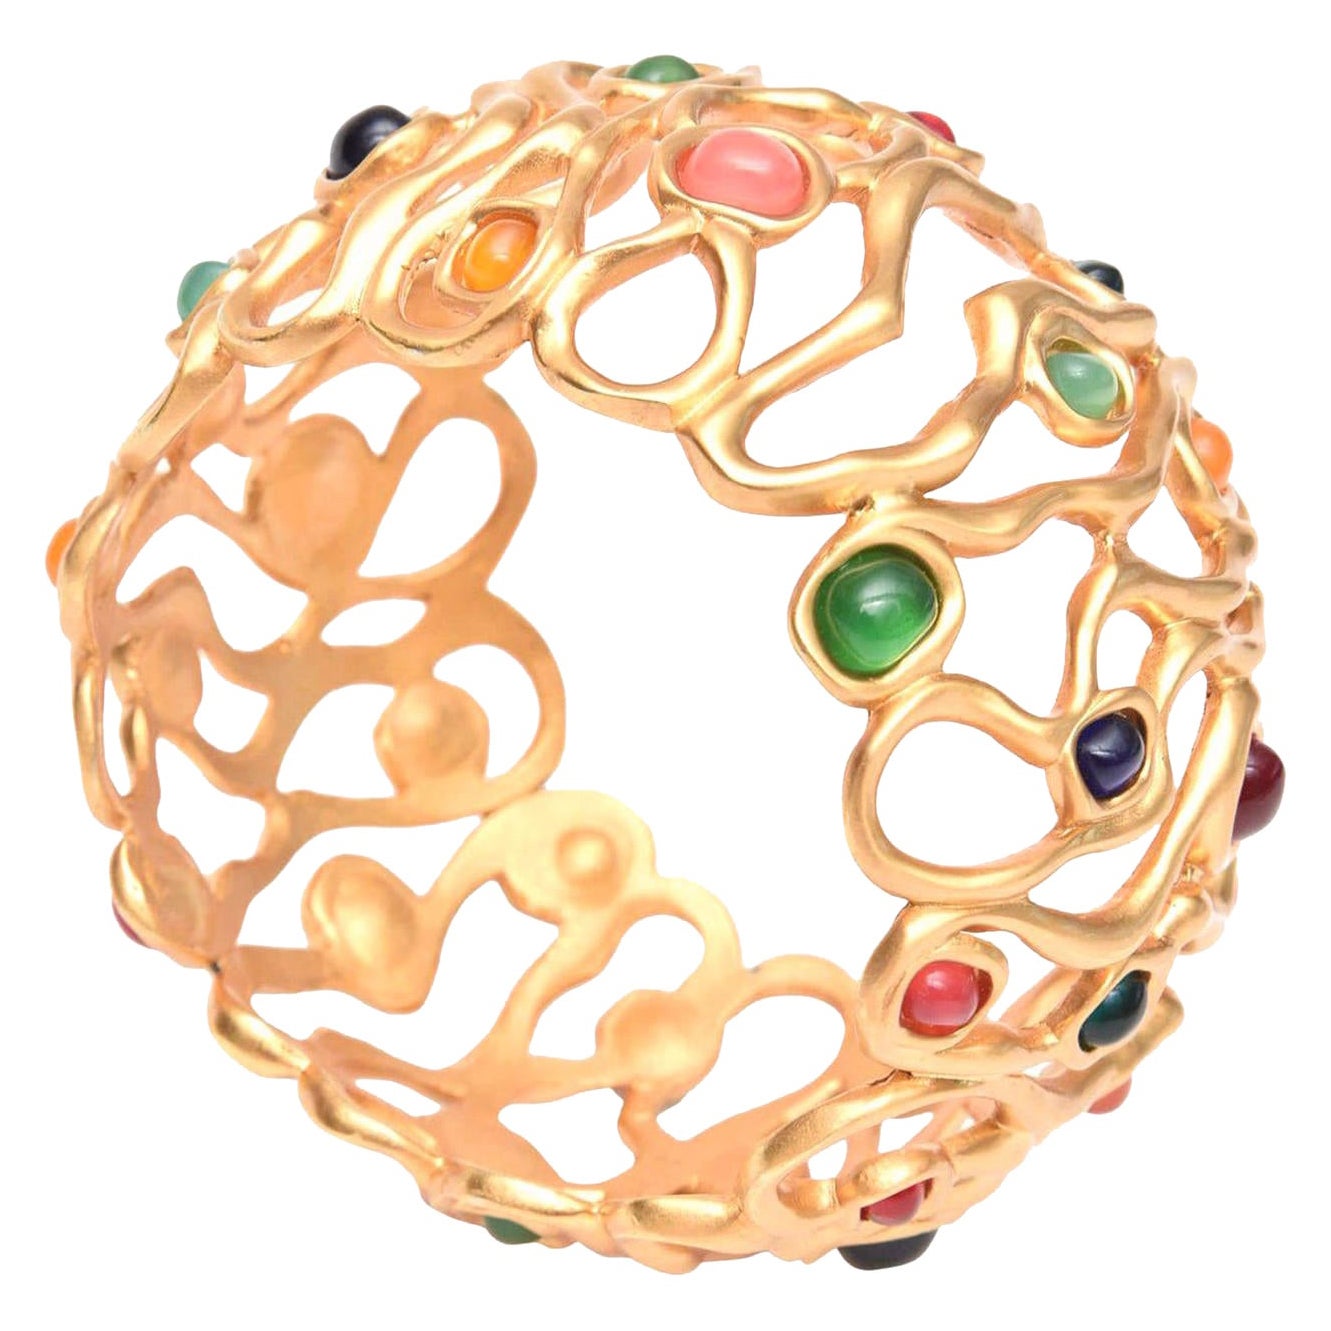  Jewel Tone Stone Cuff Bracelet With Gold Plate For Sale